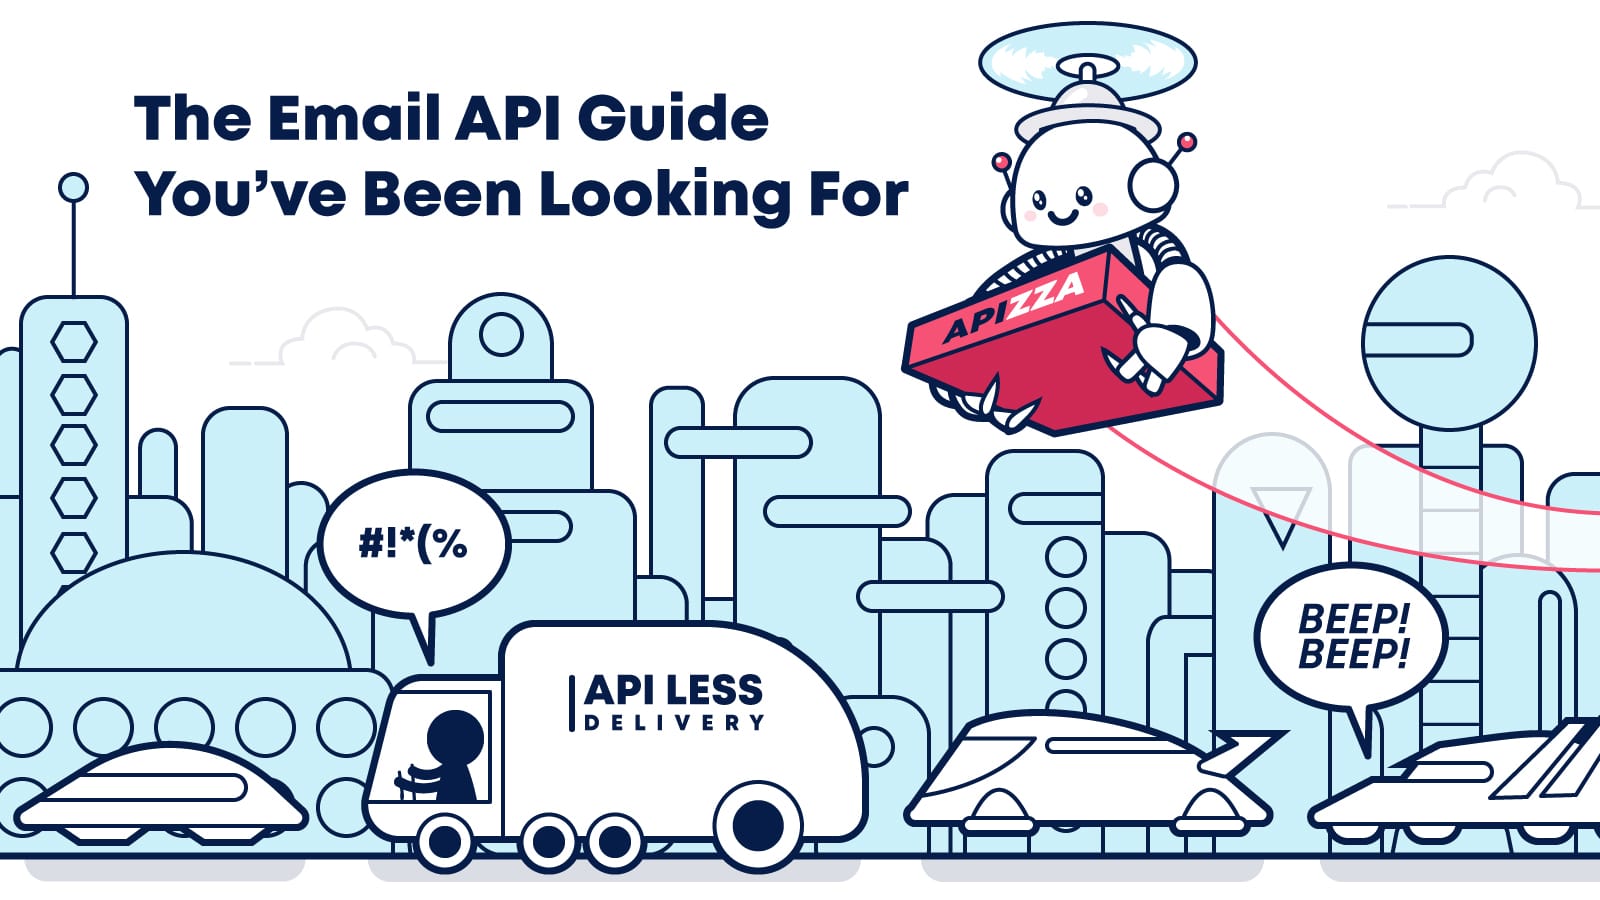 The email API guide for advanced marketers